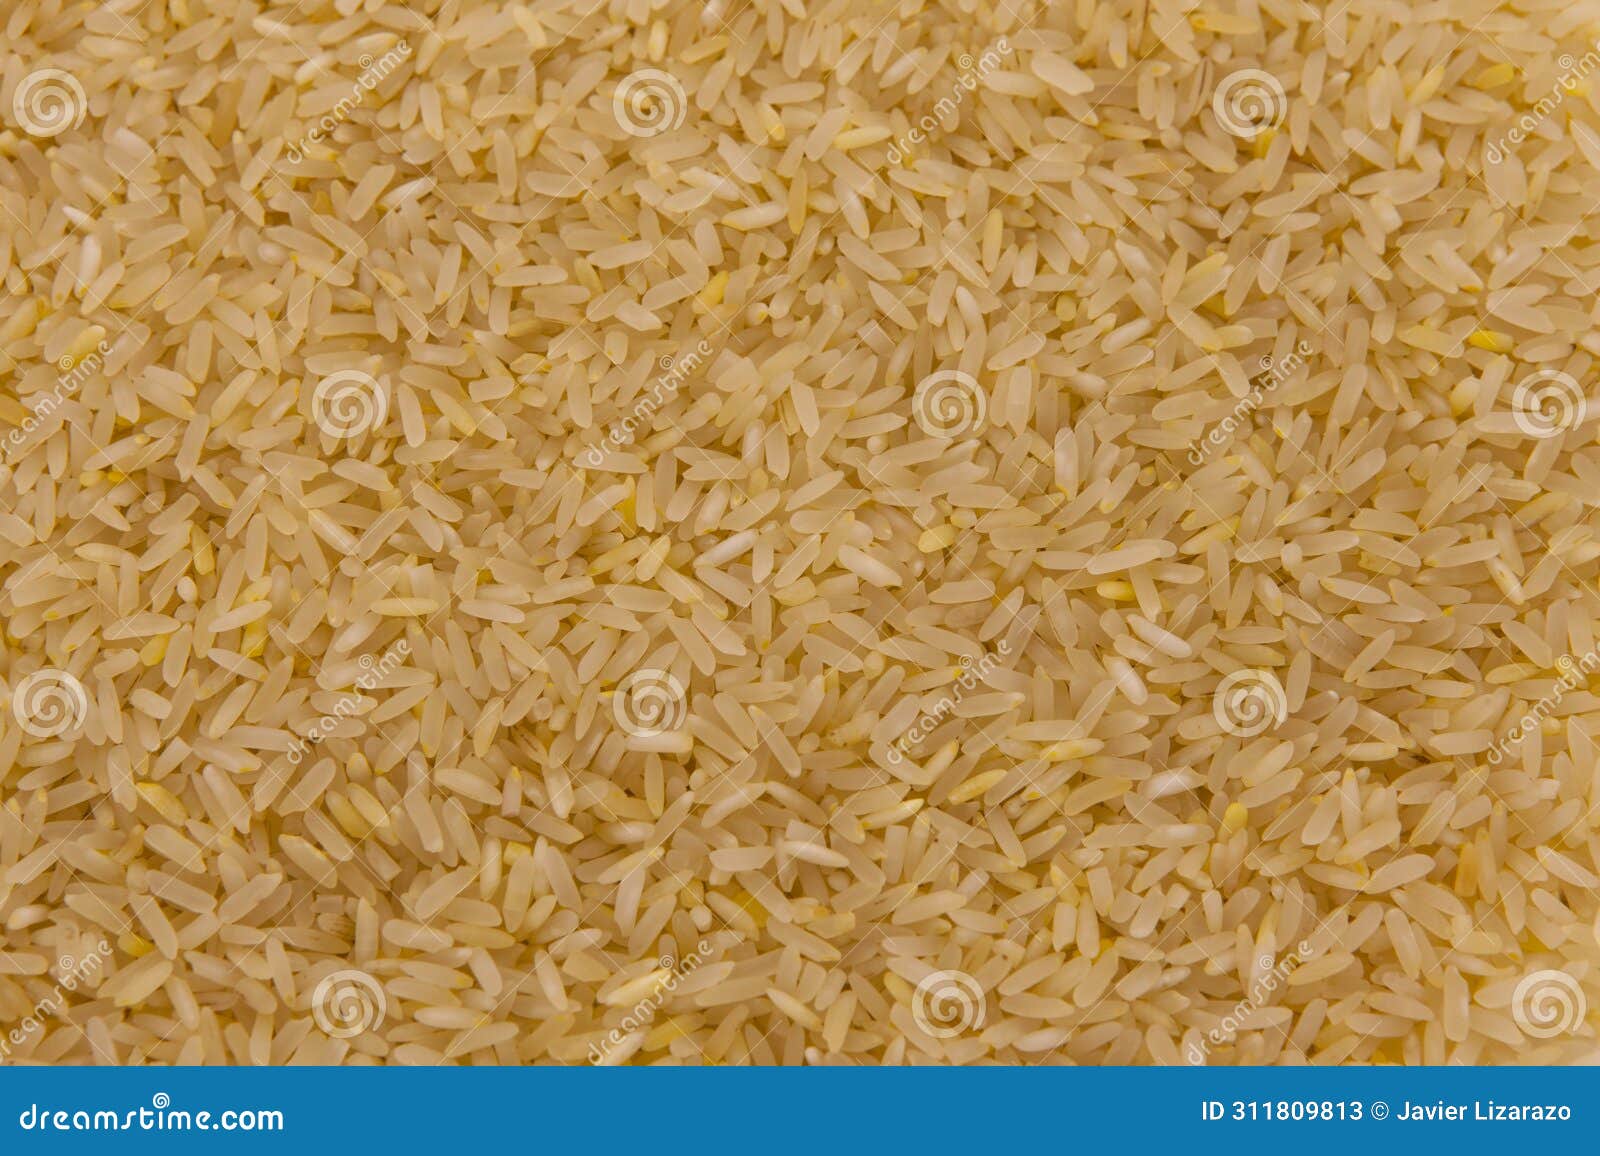 close-up of raw yellow rice grains